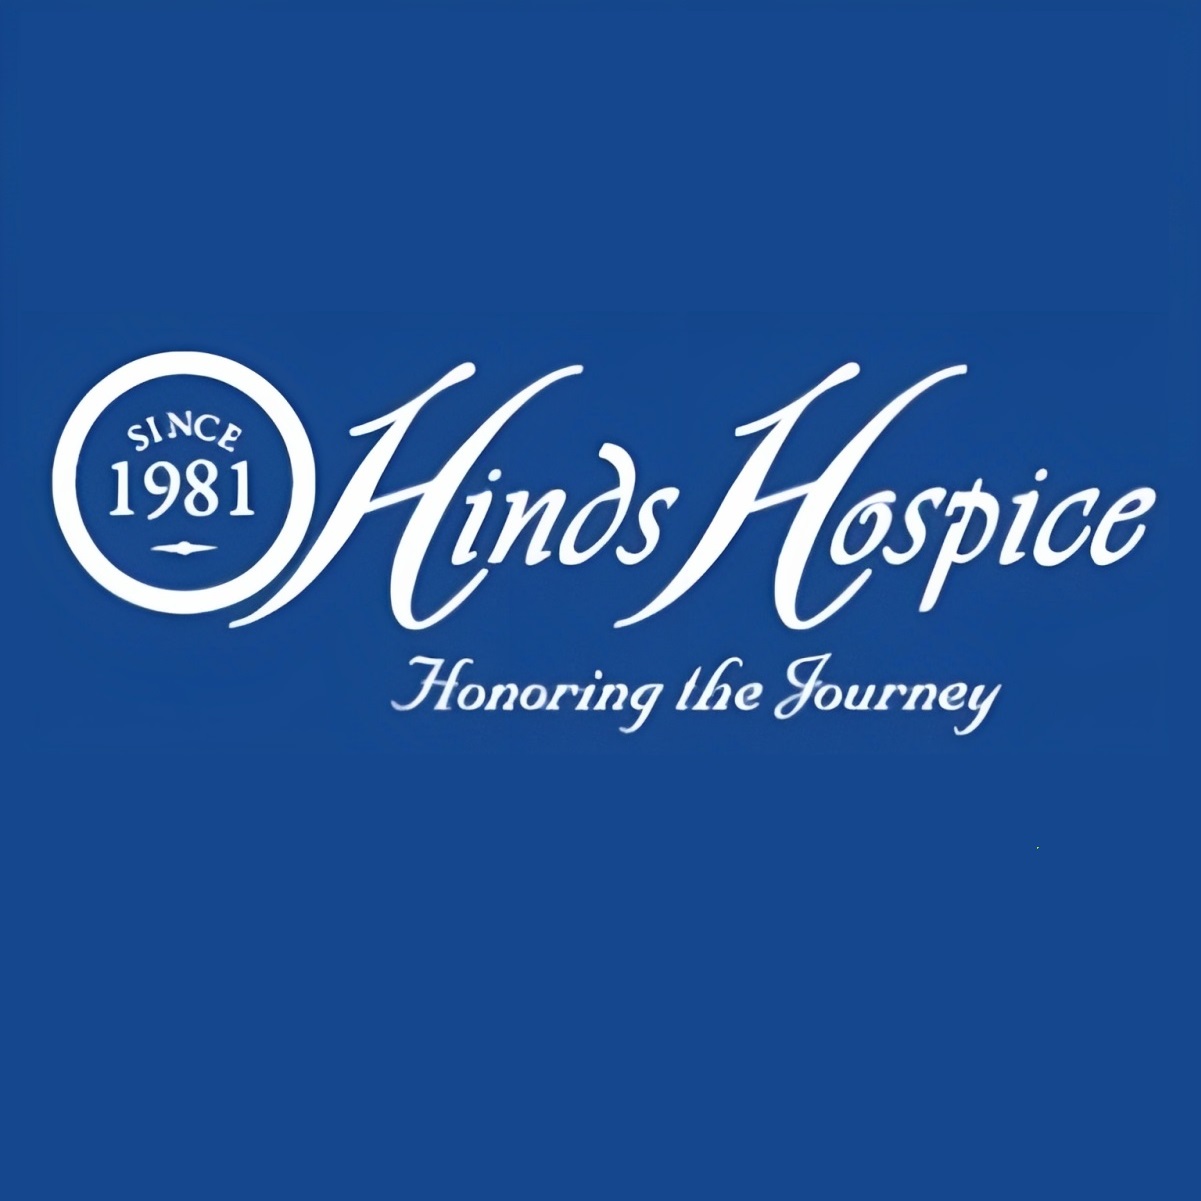 hinds hospice | home health care in fresno